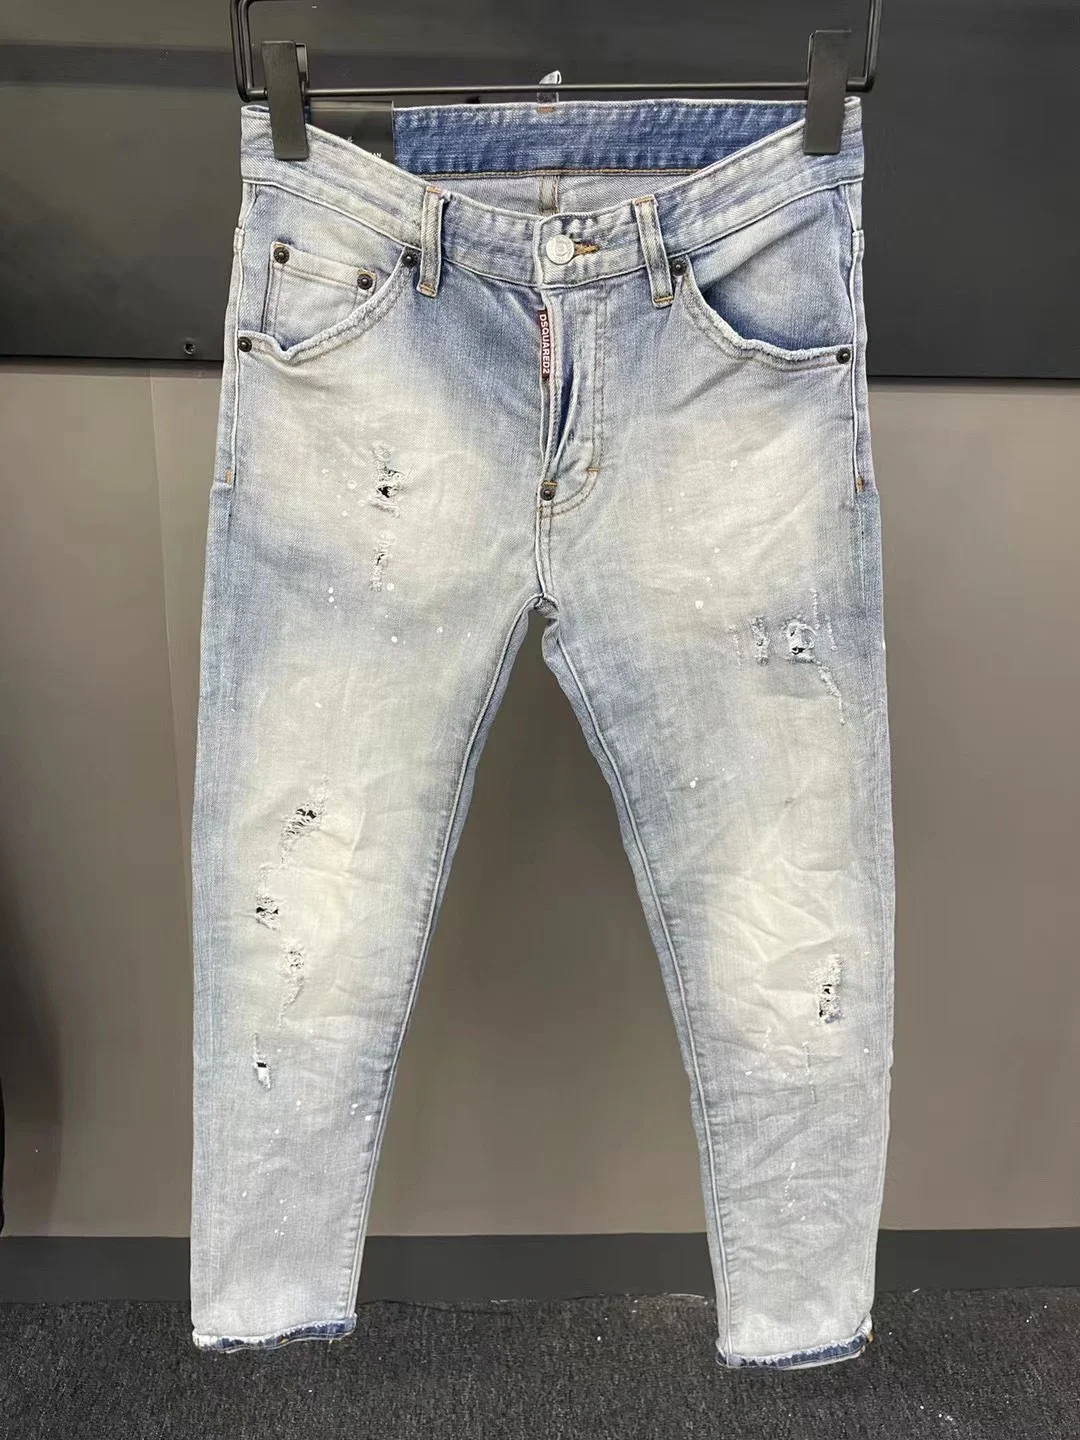 

2022 New Worn Simple D2 Men's Self-cultivation Ripped All-match Stretch Jeans Tight-fitting Small Straight